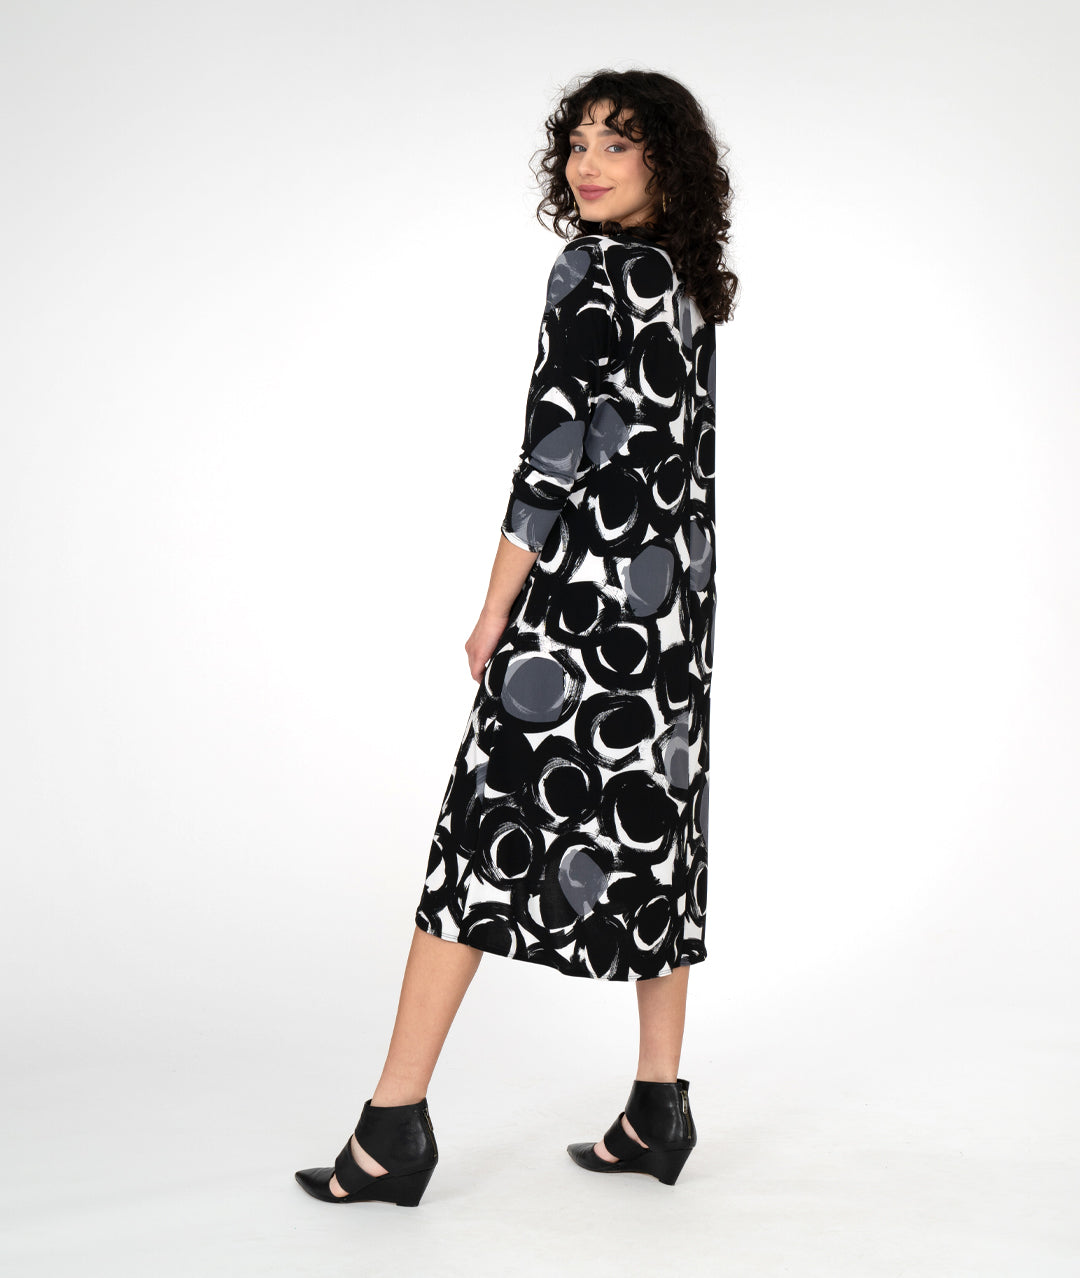 model in a black, white and grey circle print dress with a knot detail on one hip